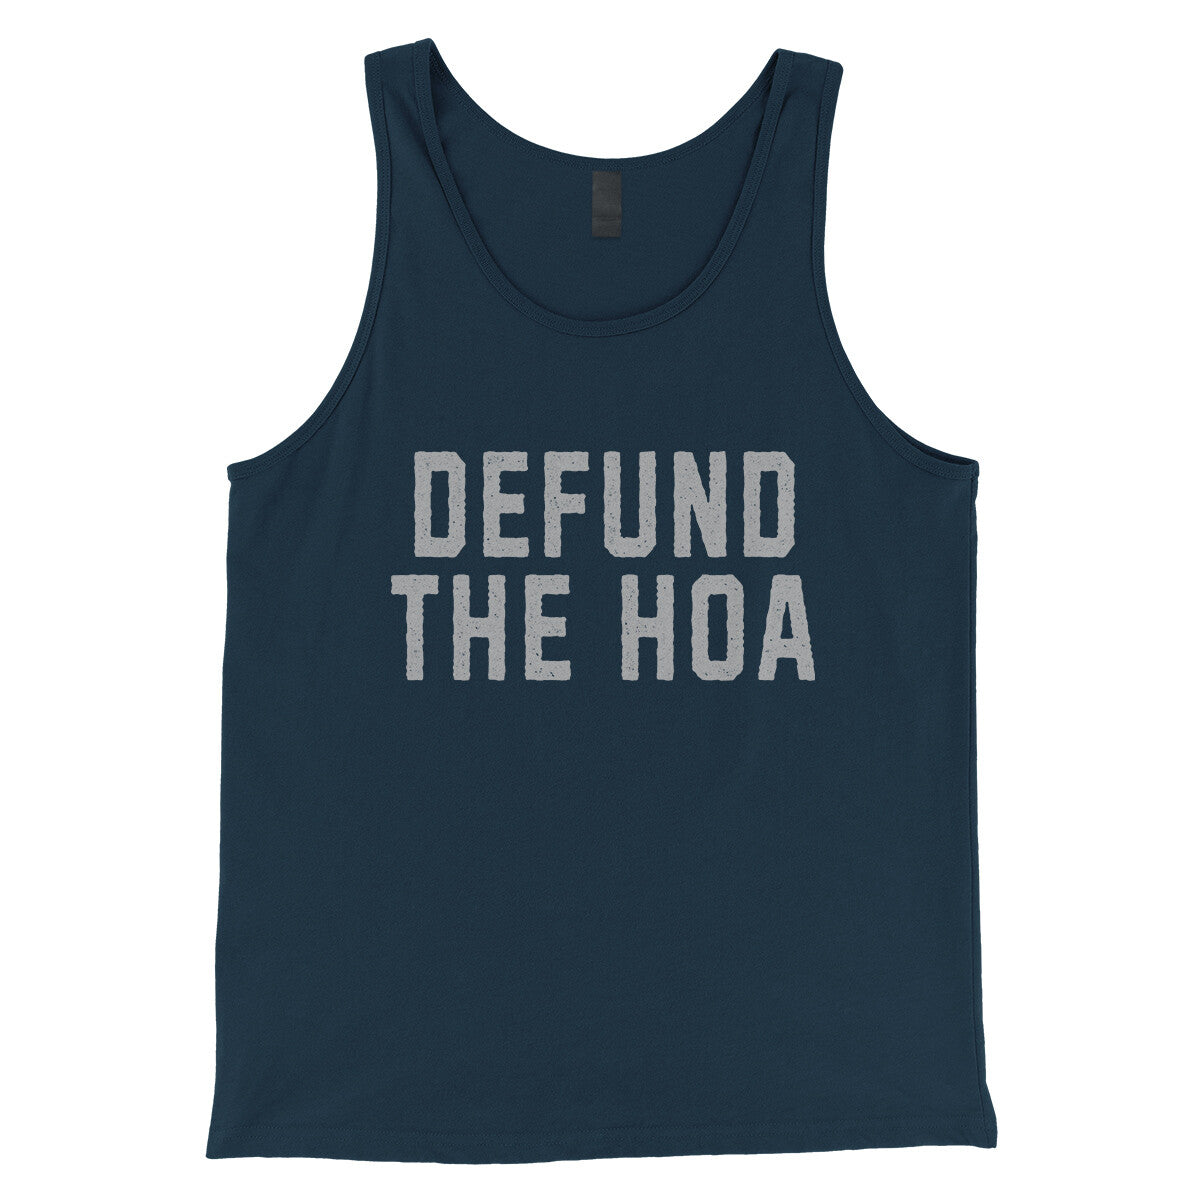 Defund the HOA in Navy Color